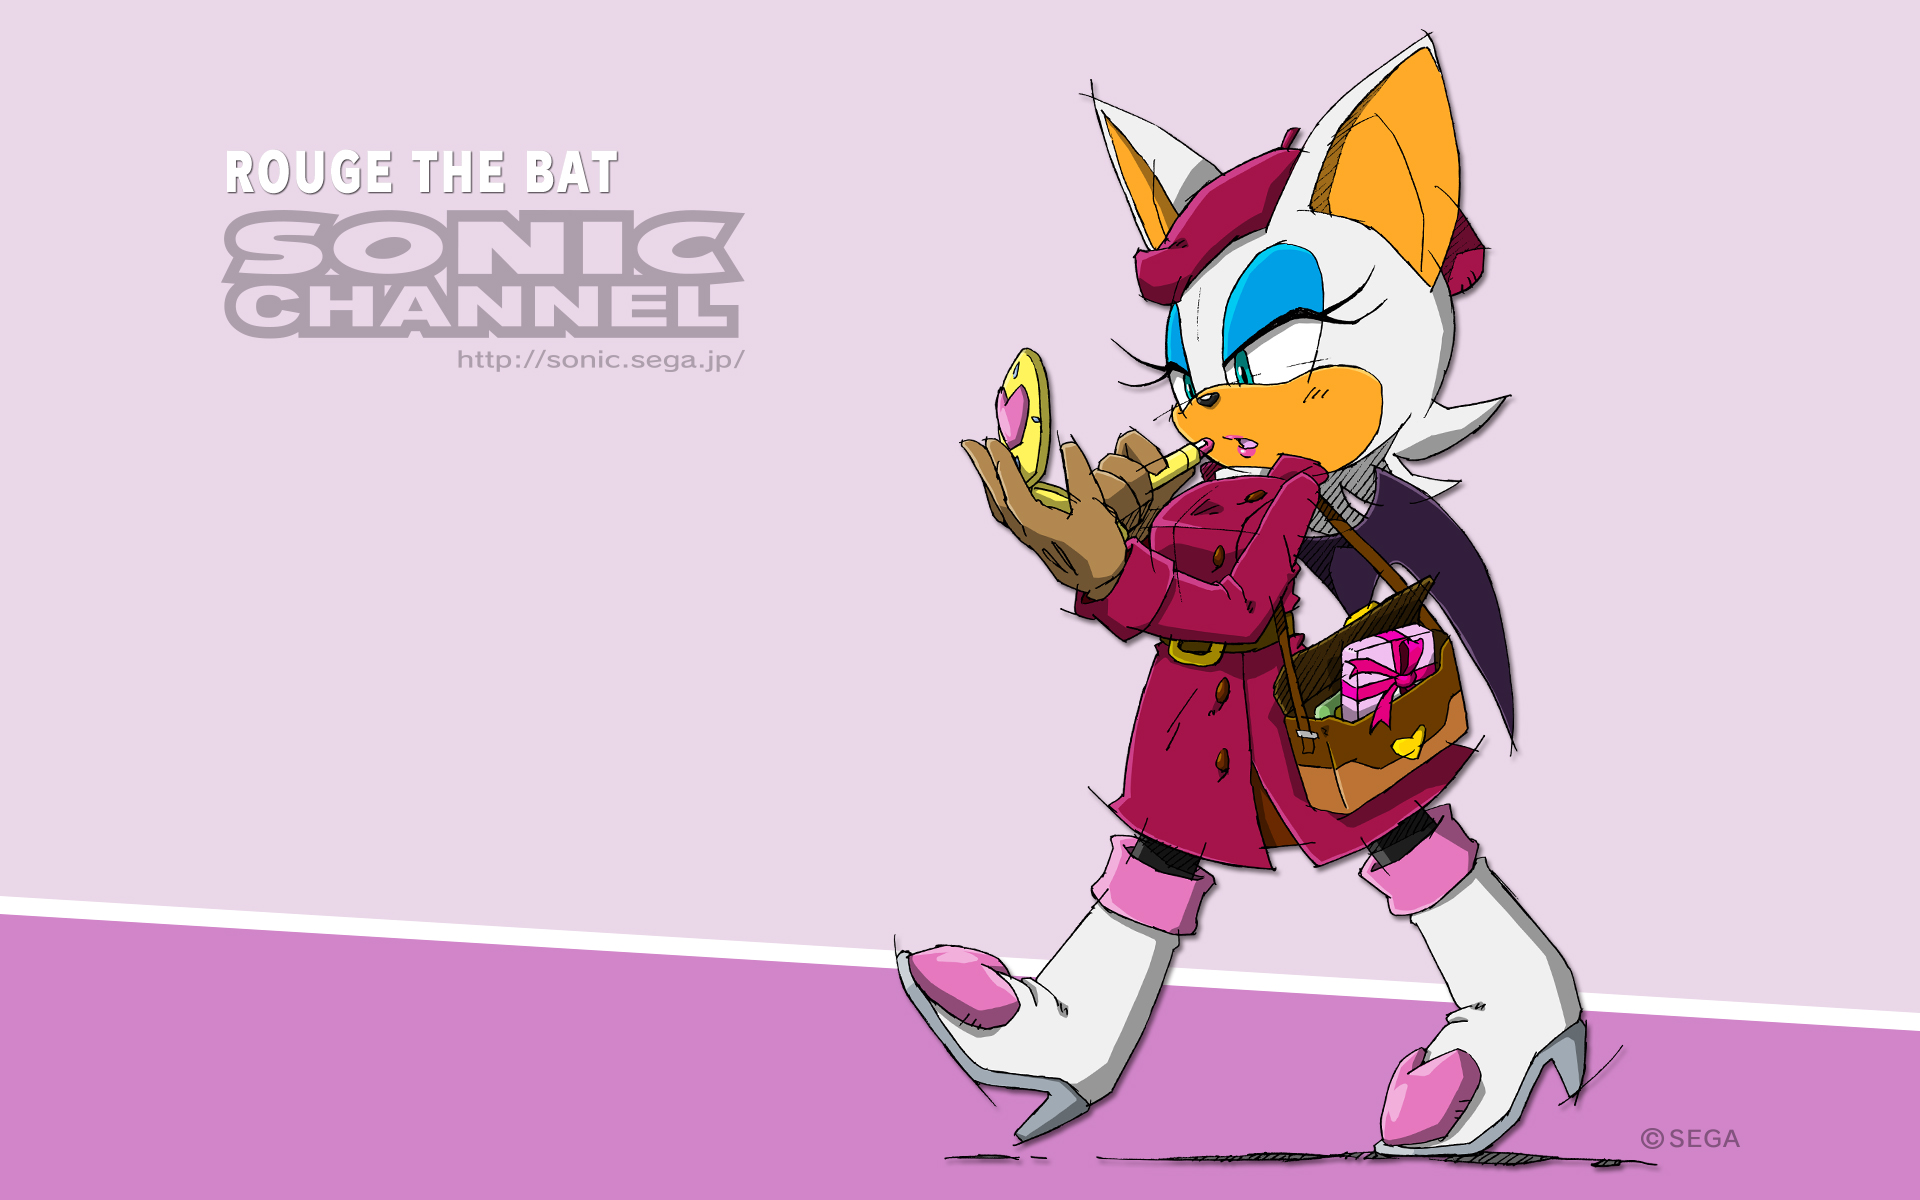 http://lastminutecontinue.com/wp-content/gallery/wallpapers/S/sonic-channel/2015_02_rouge.jpg